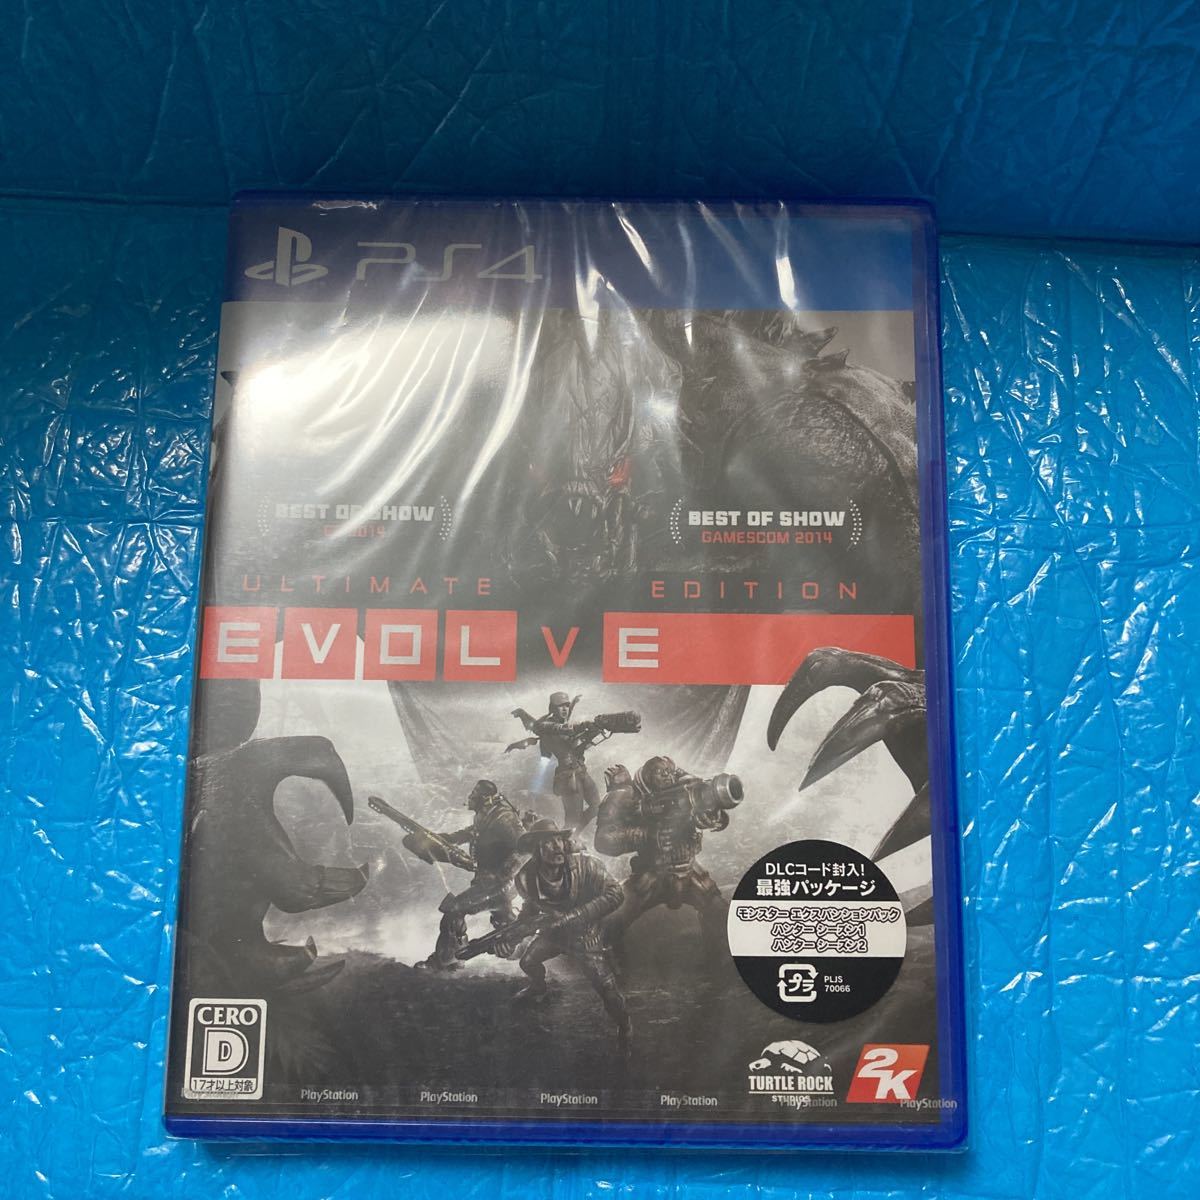 Hates patologisk forklædning PS4】 EVOLVE Ultimate Edition 新品 未開封｜PayPayフリマ